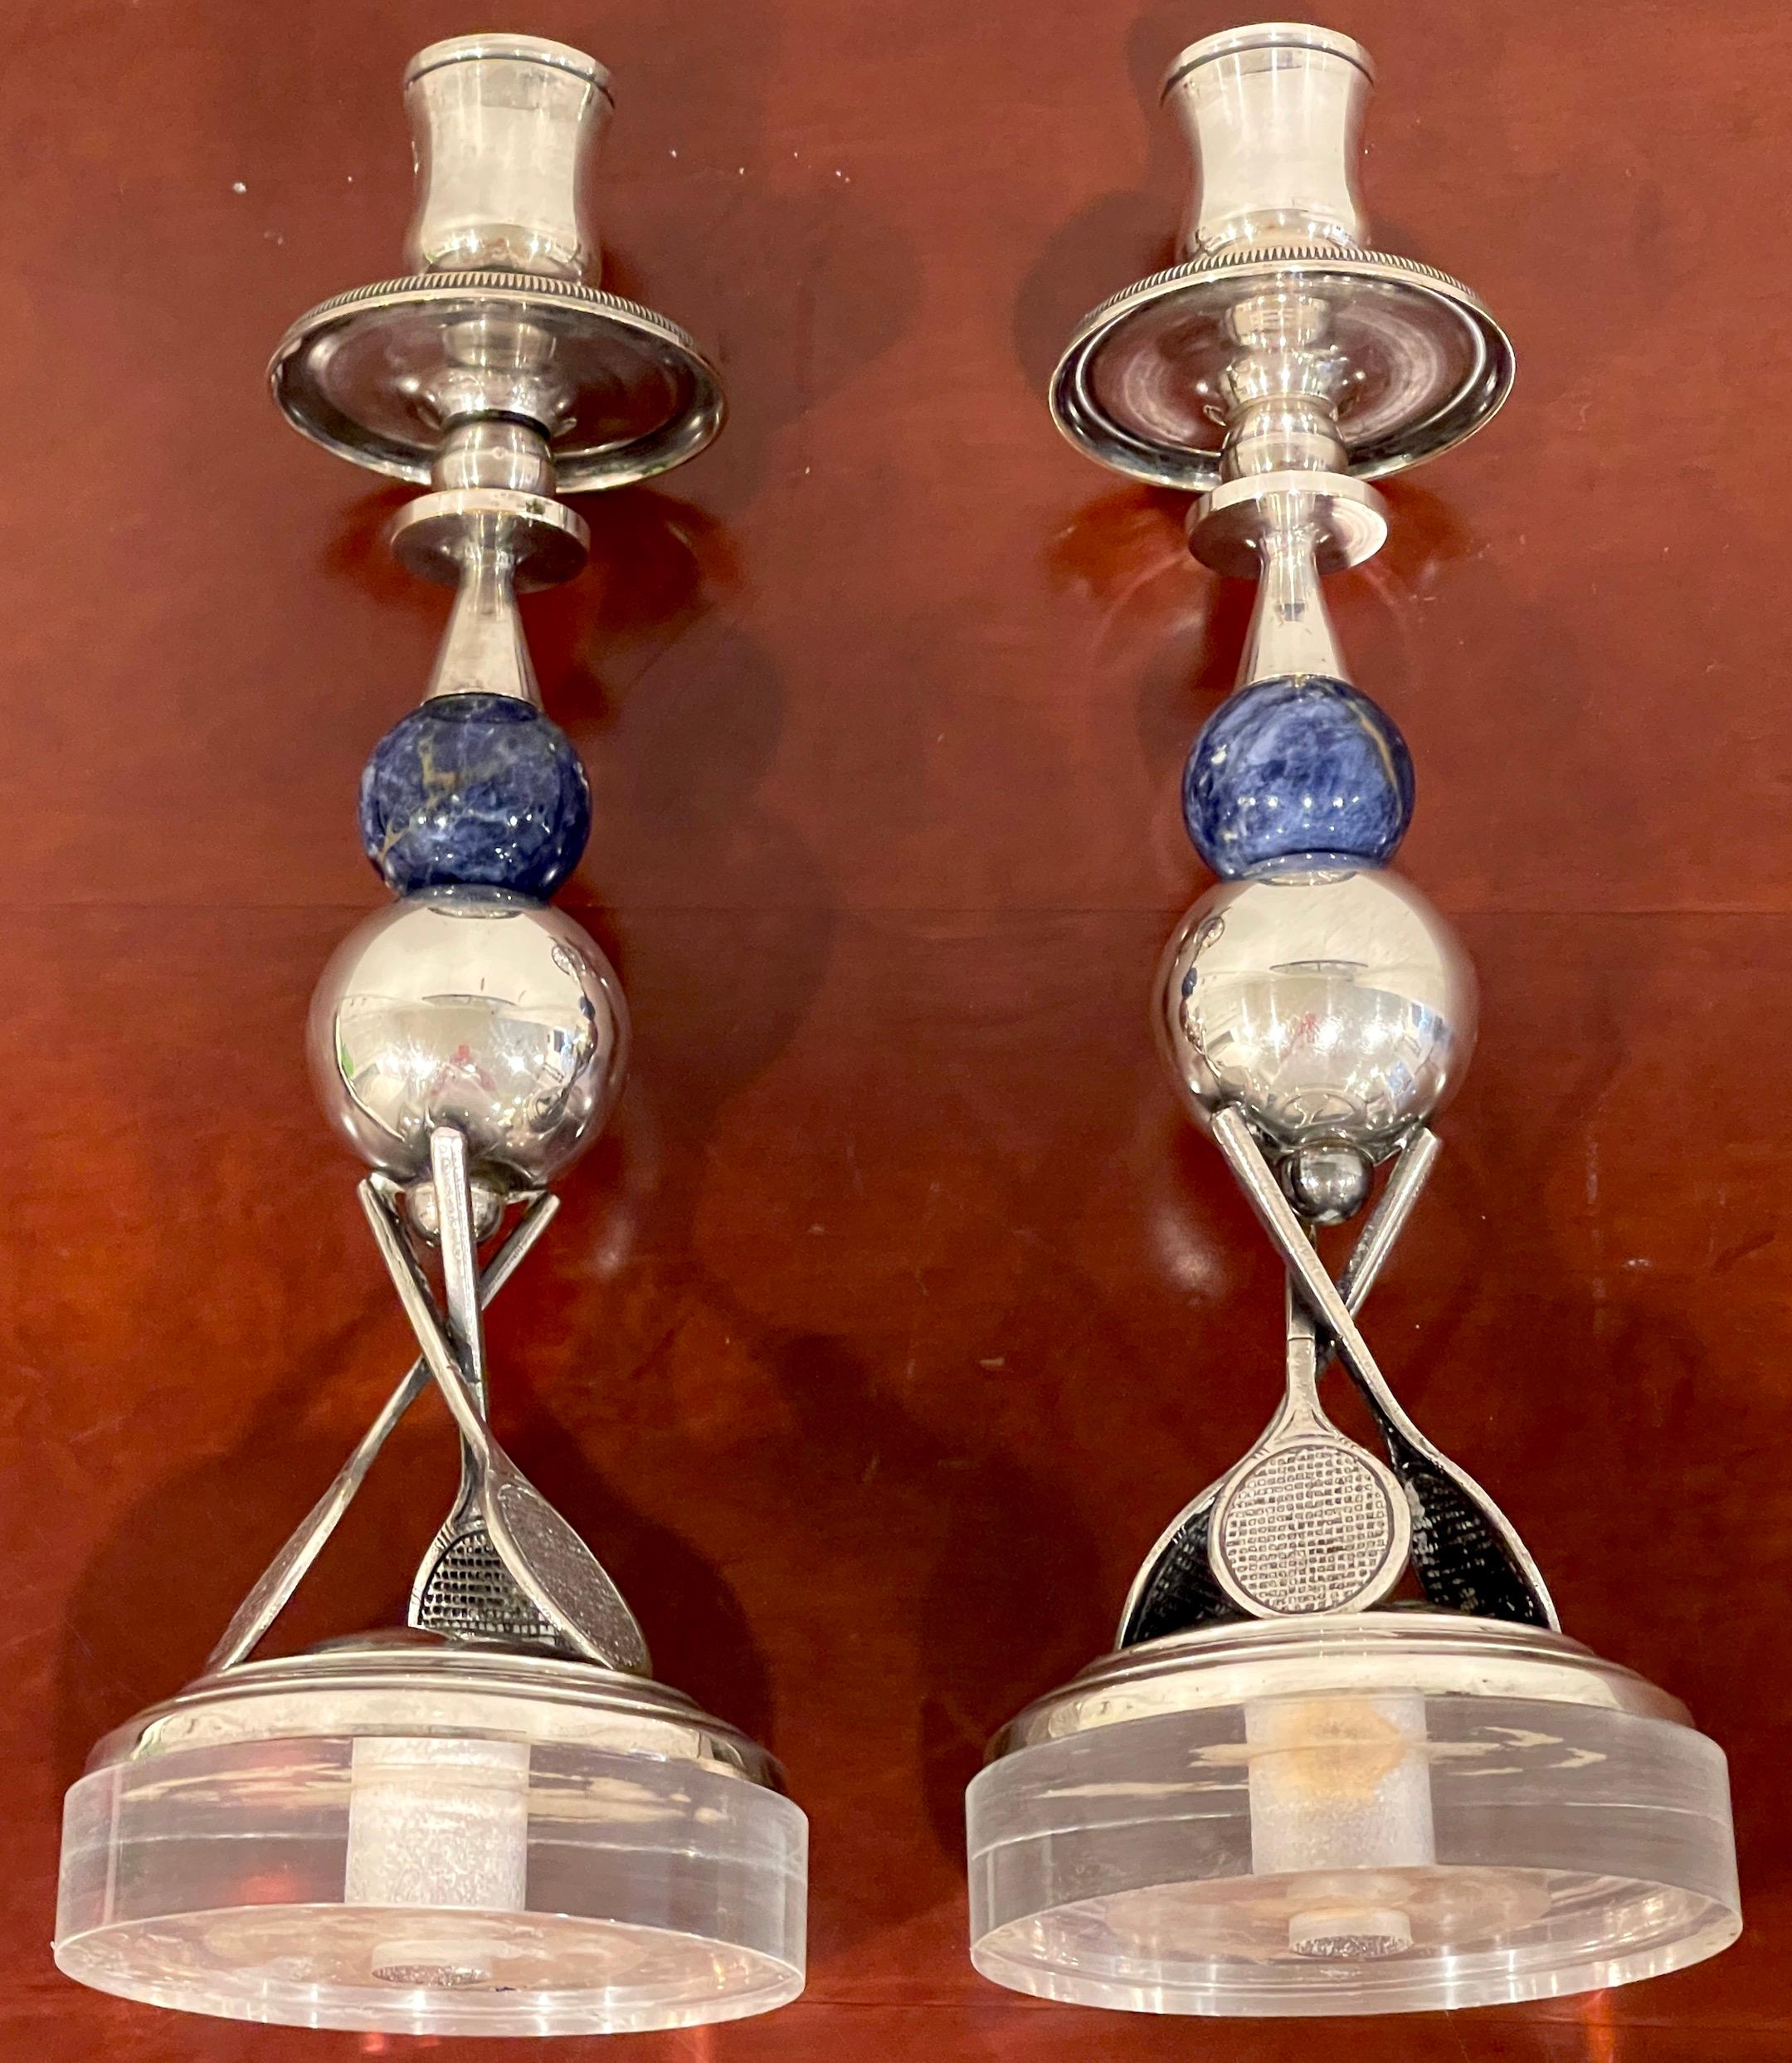 Pair of Italian Silver-Plated, Lapis & Lucite Tennis Motif Candlesticks For Sale 2